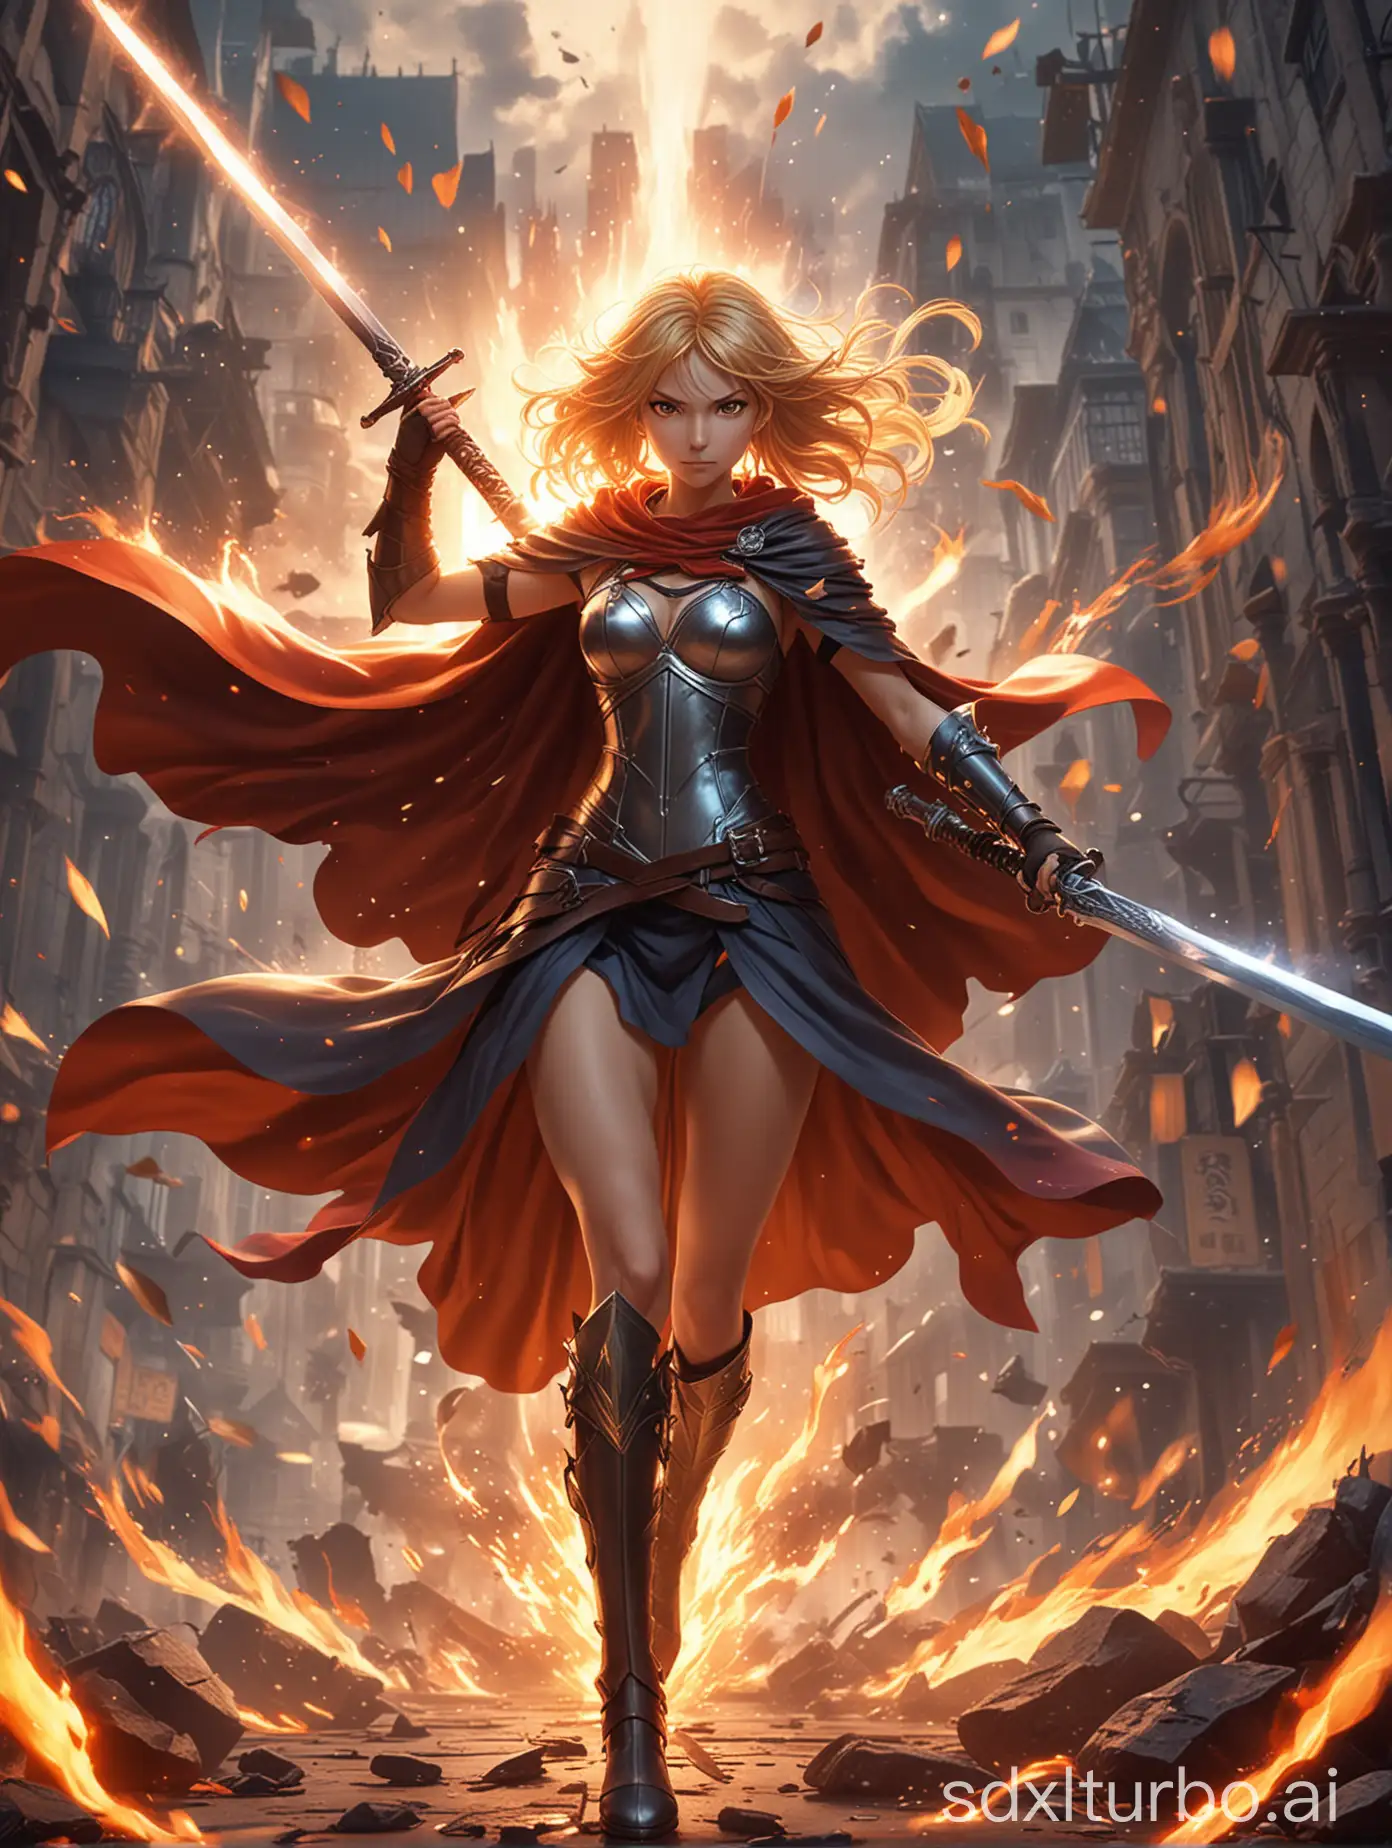 Create a battle action game style poster featuring a dynamic full-body rendered anime girl wielding a massive sword, her hair and cape flowing dramatically as she leaps through the air with flames raging in the background.